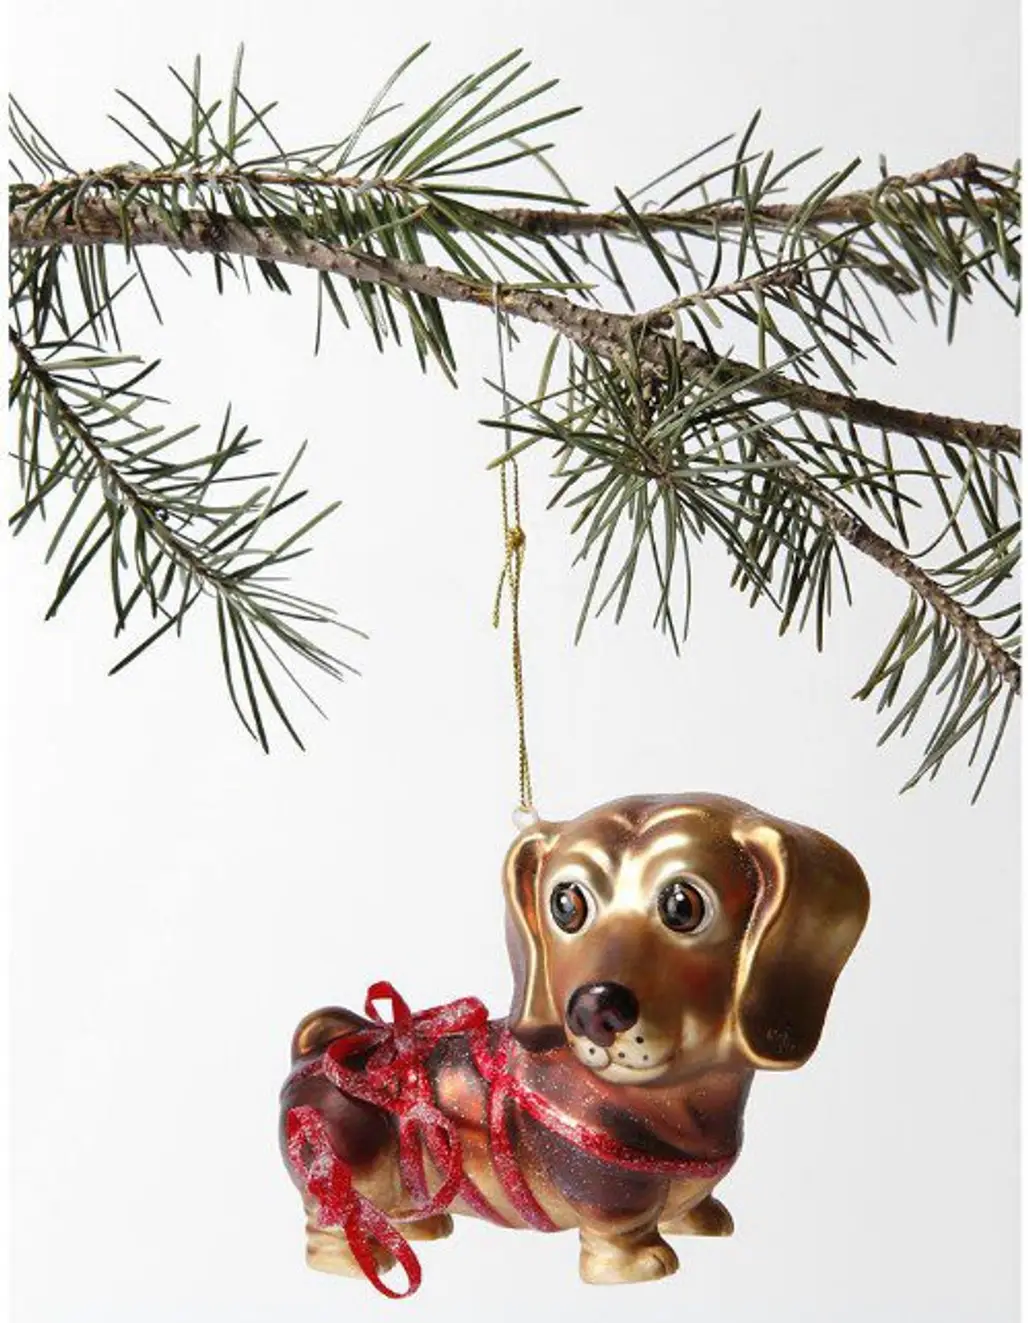 Wiener Dog Tied up Ornament